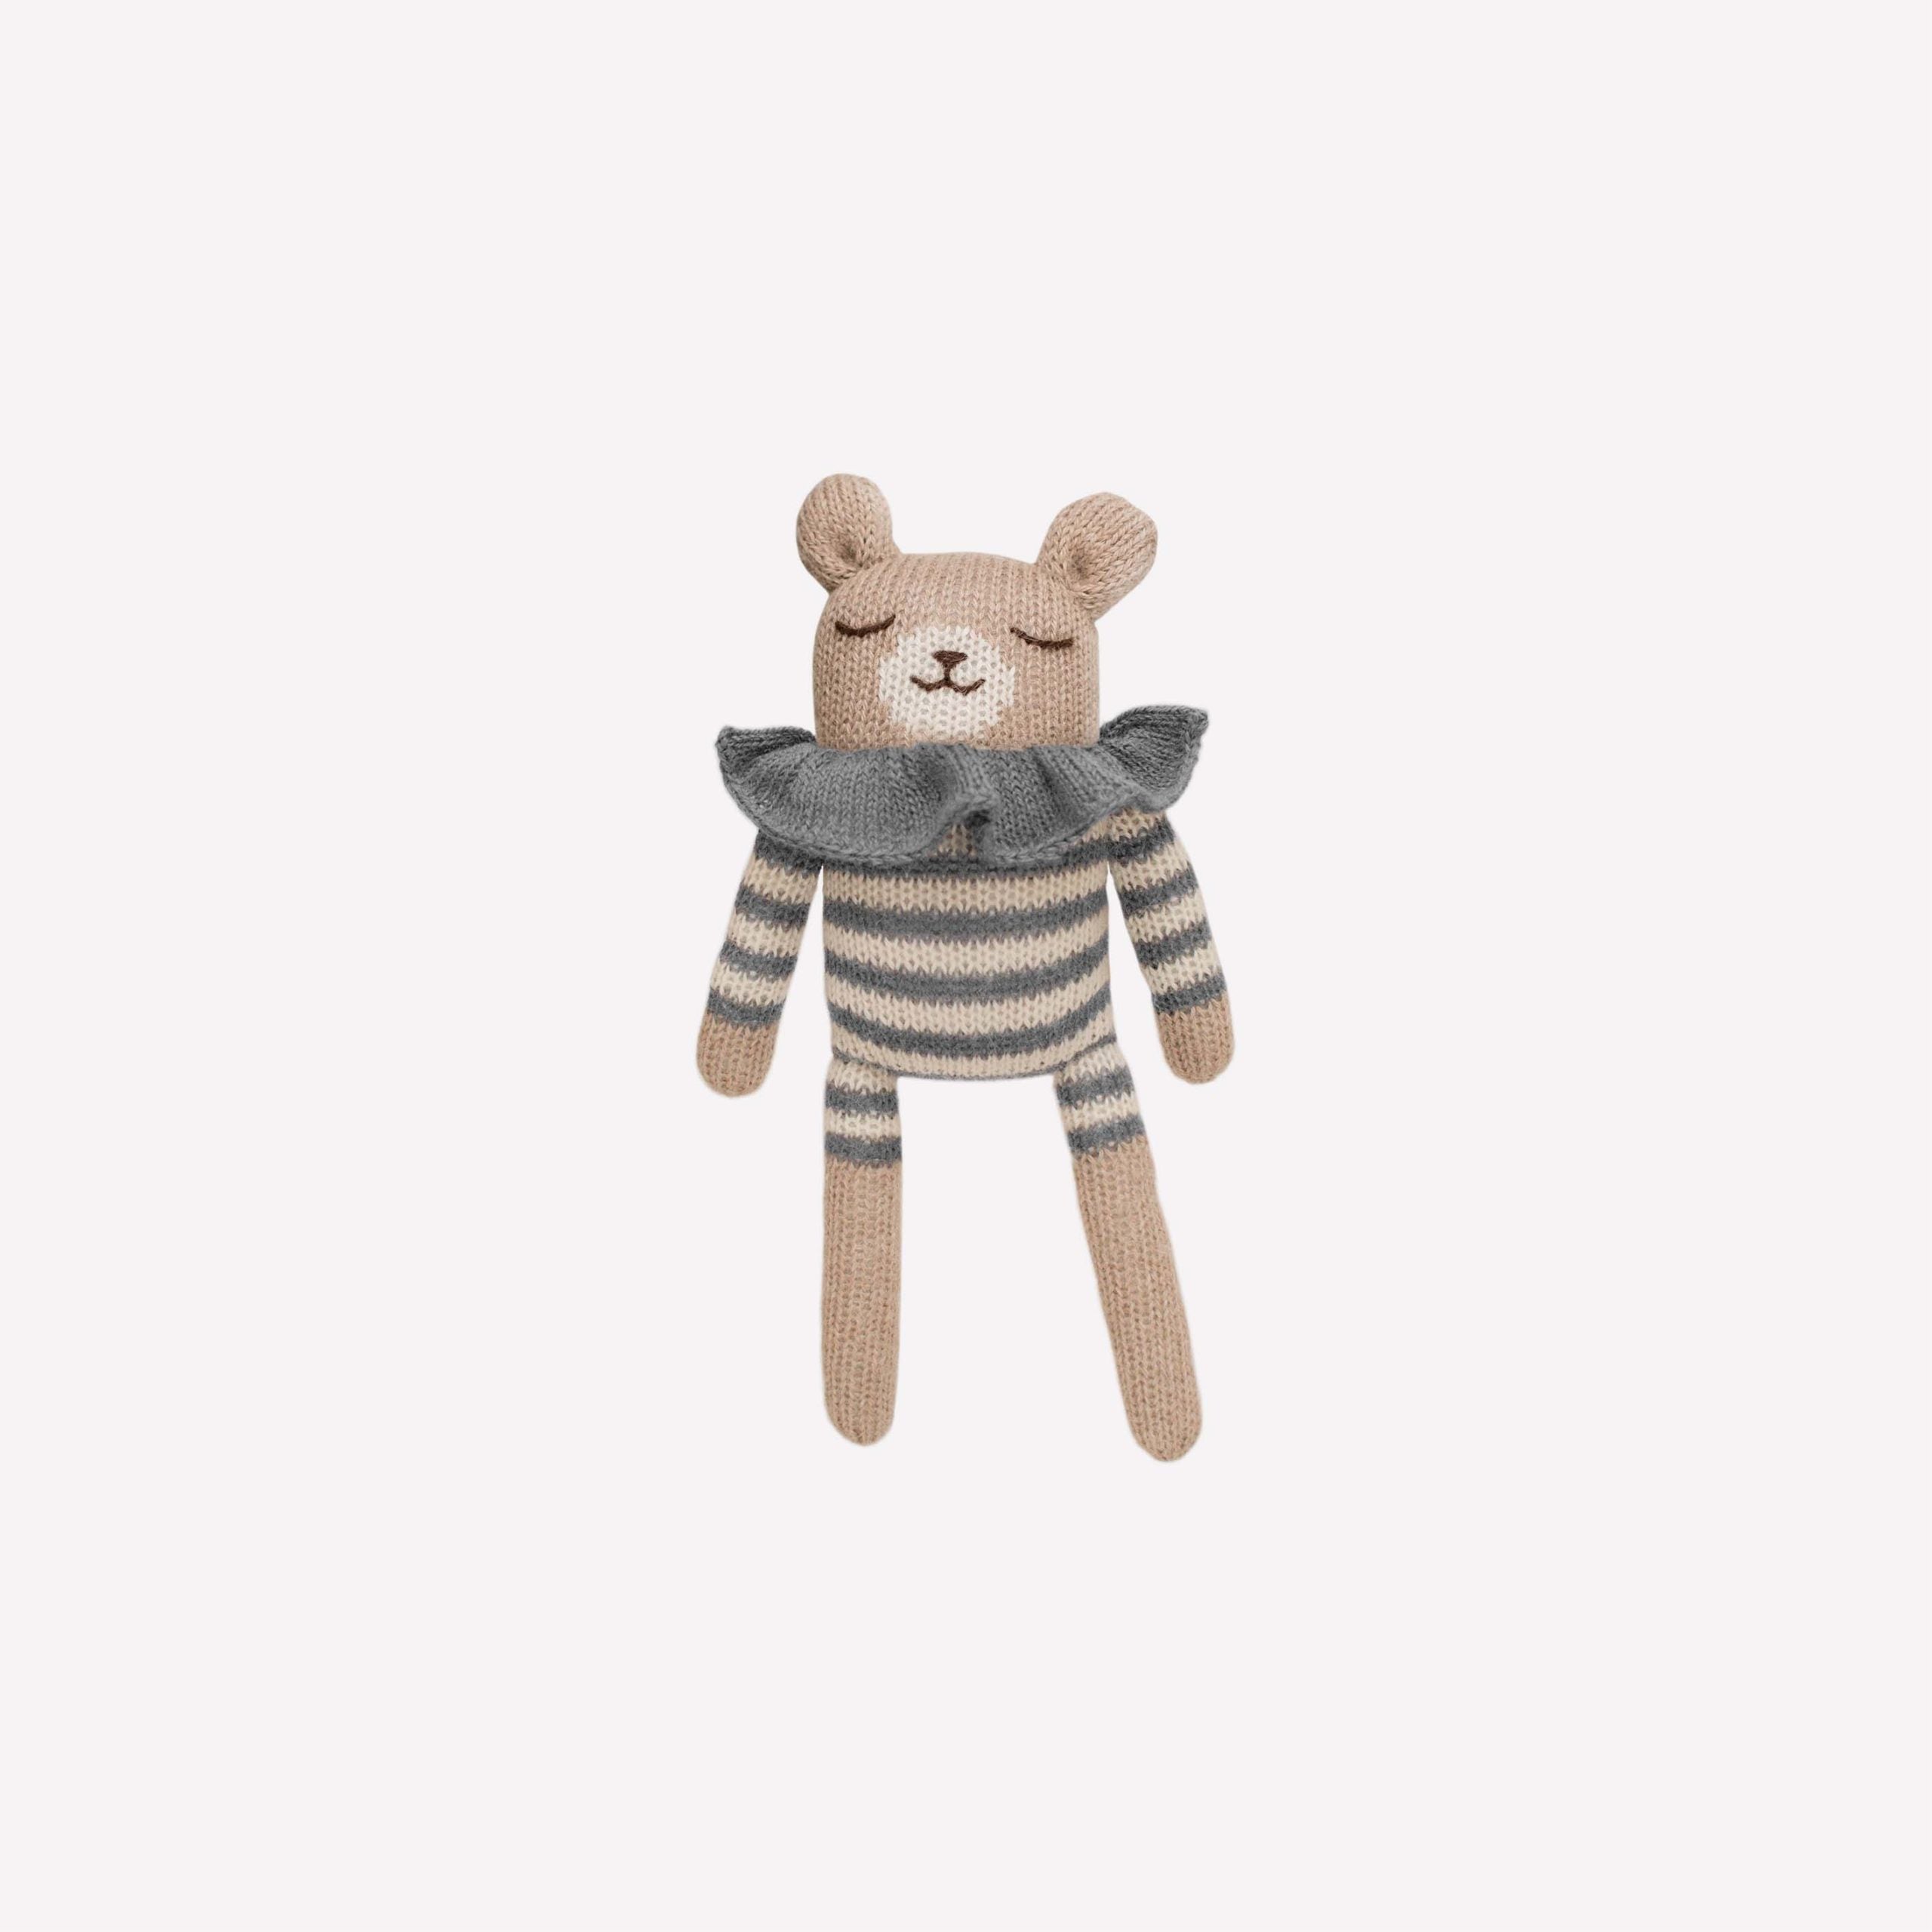 Main Sauvage Teddy Knit Toy - Slate Striped Romper